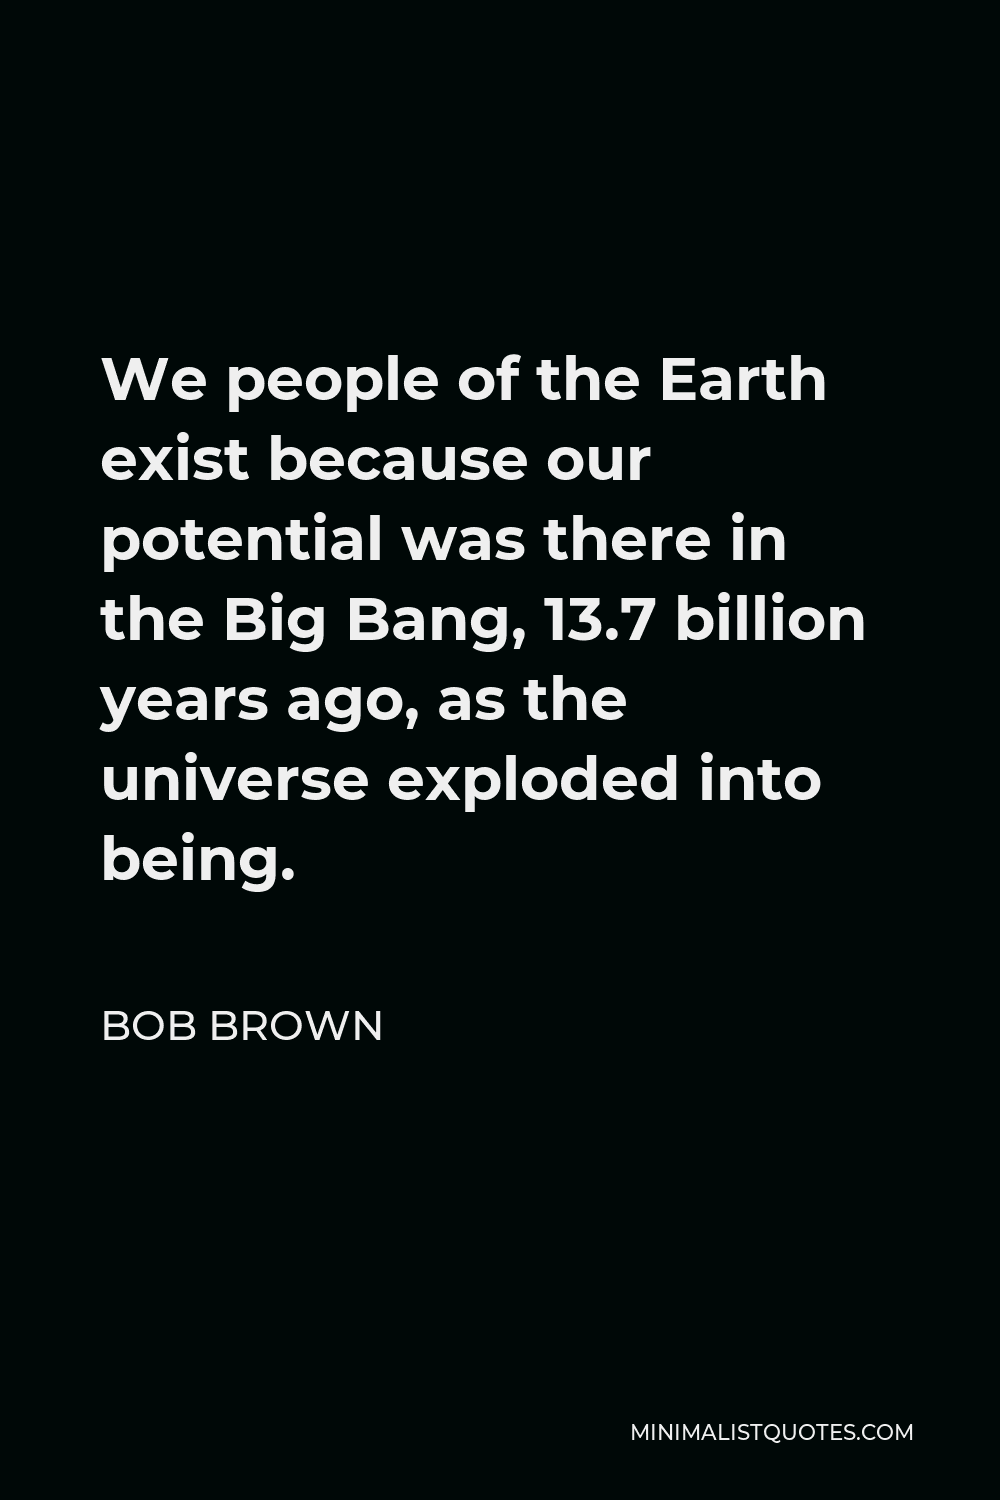 Bob Brown Quote - We people of the Earth exist because our potential was there in the Big Bang, 13.7 billion years ago, as the universe exploded into being.